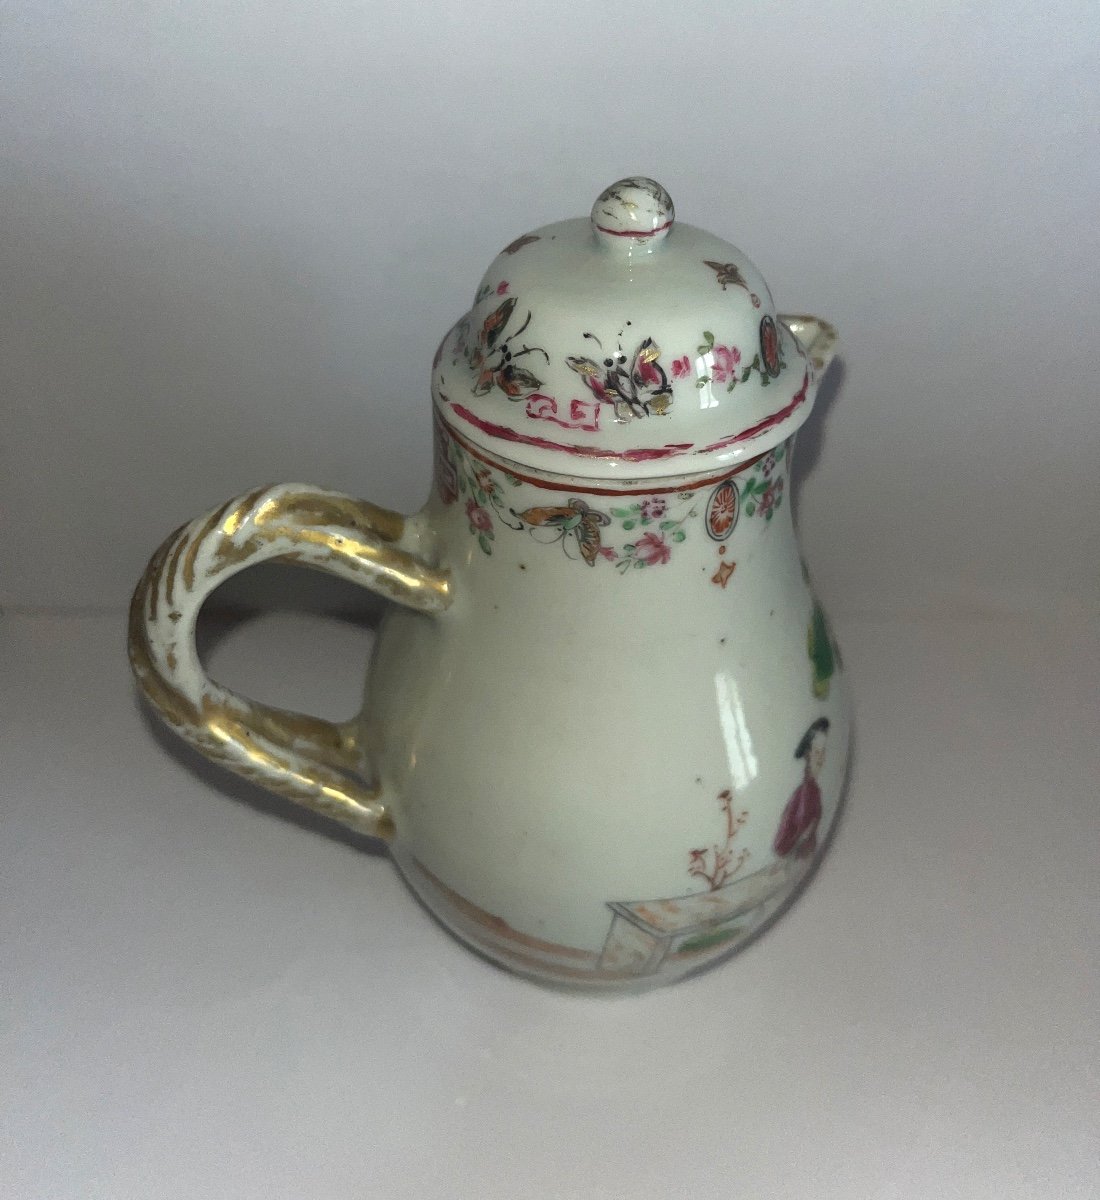 Creamer Compagnie Des Indes  With Chinese Decor From The End Of 17th Century, Beginning Of The 18th Century-photo-8